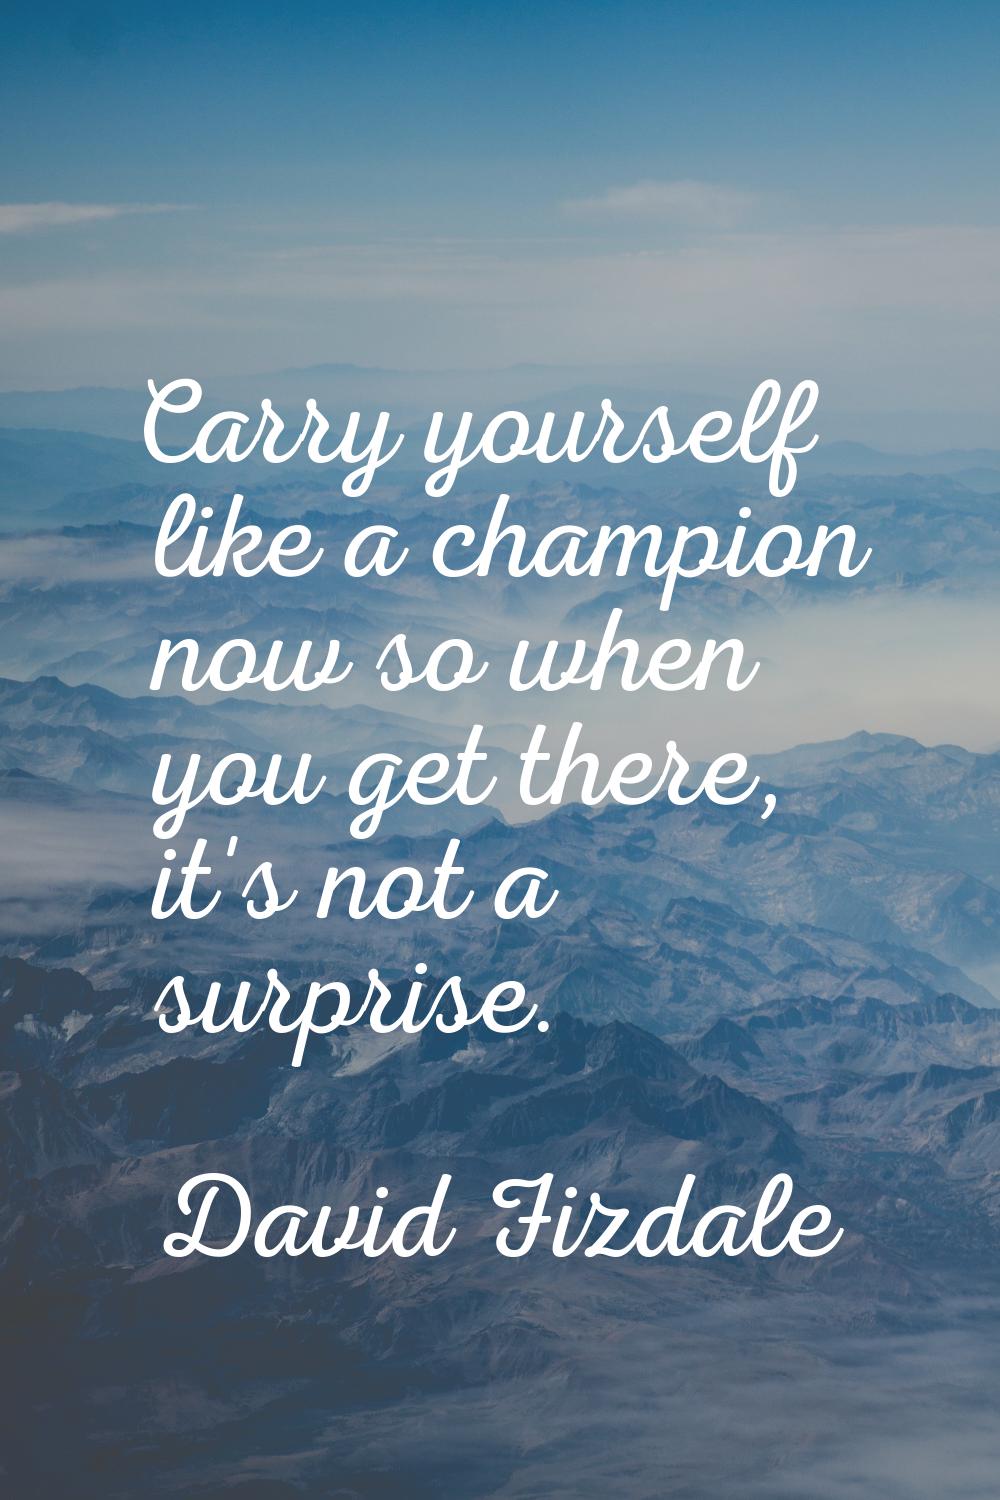 Carry yourself like a champion now so when you get there, it's not a surprise.